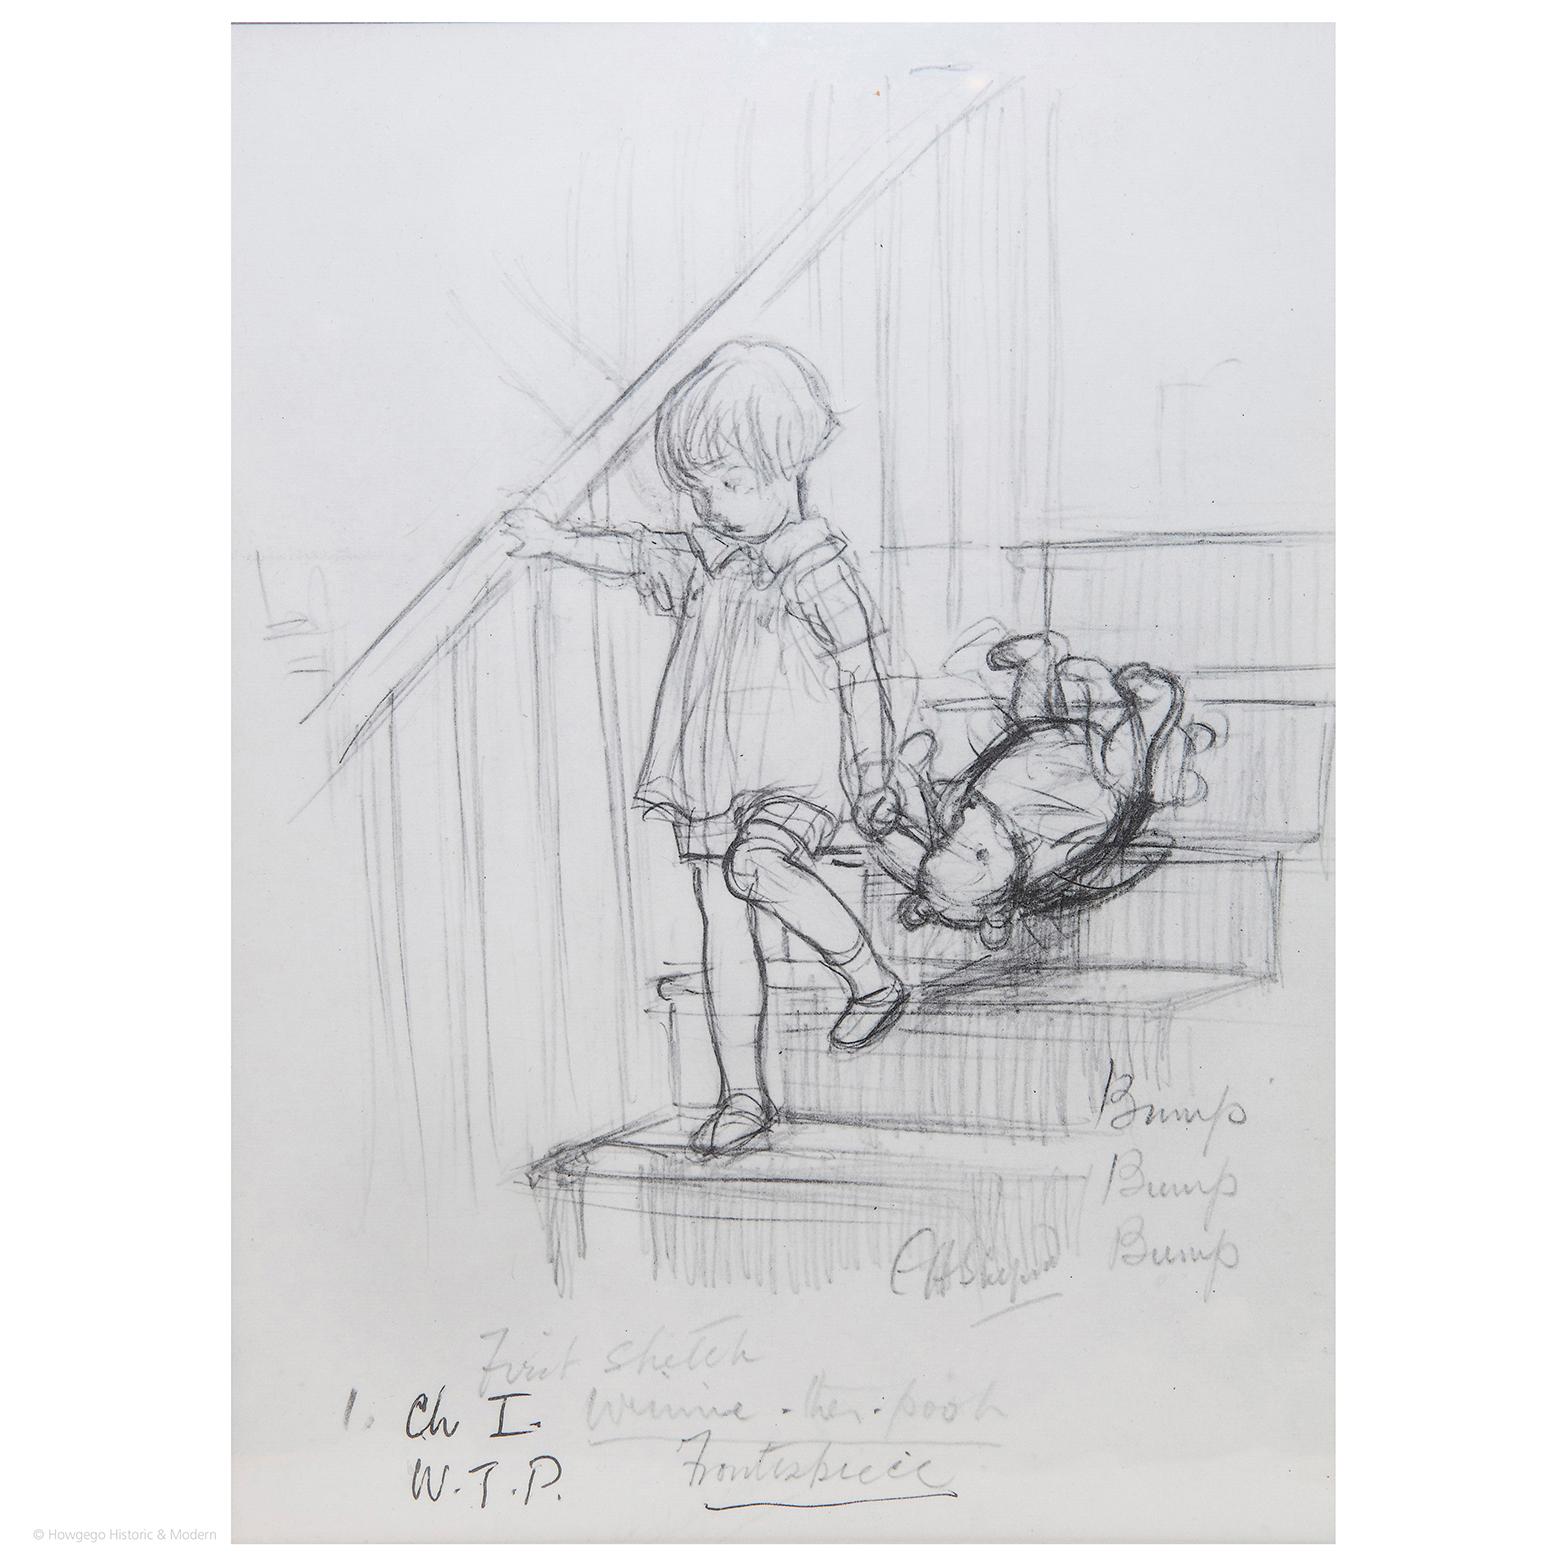 - Charming vintage print of one of the best-known illustrations in children's literature.
- This illustration was the first depiction of Winnie-the-Pooh and Christopher Robin. It was reproduced on page xvi of Winnie-the-Pooh (Methuen, 1926) where